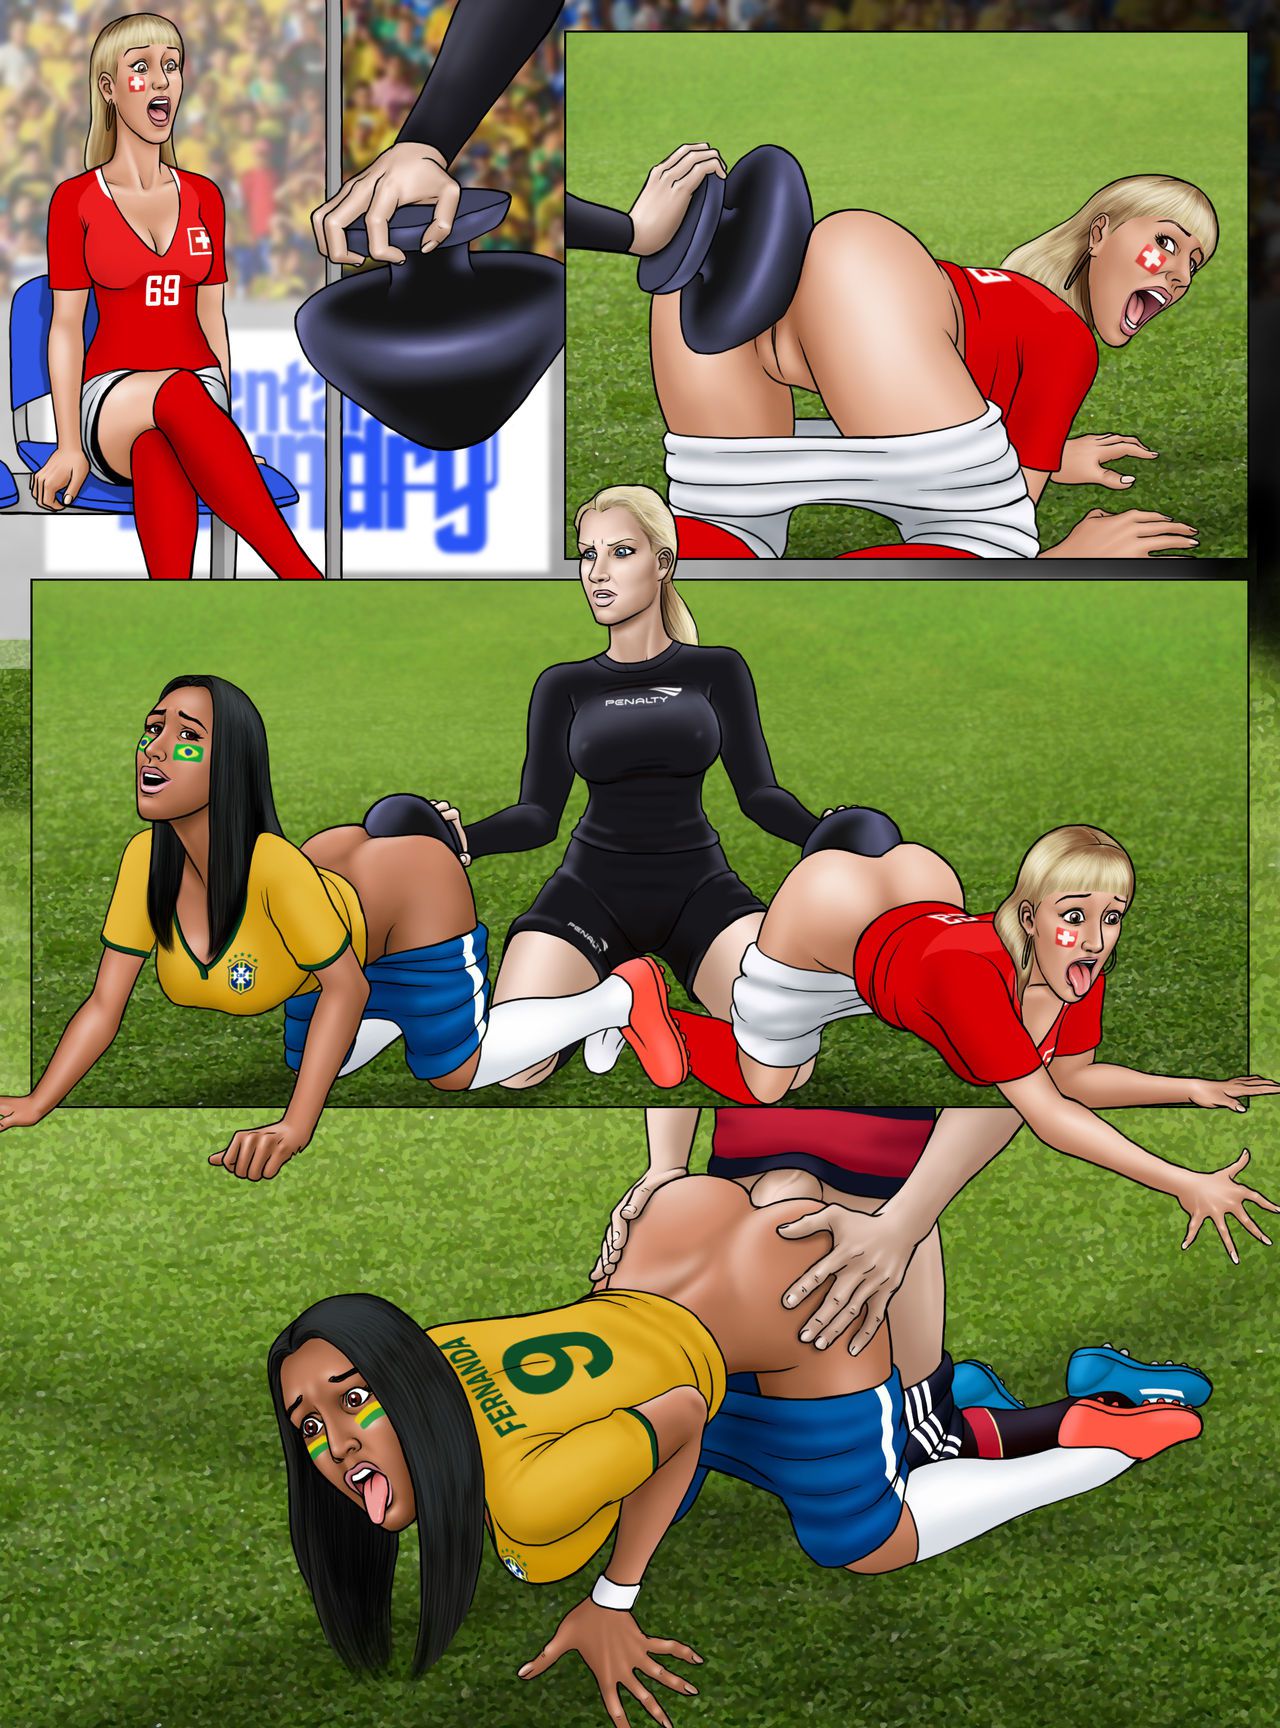 [Extro] FIFA World Cup Russia 2018 - Soccer Hentai - Women's World Cup France 2019 (Ongoing) [Korean] 25